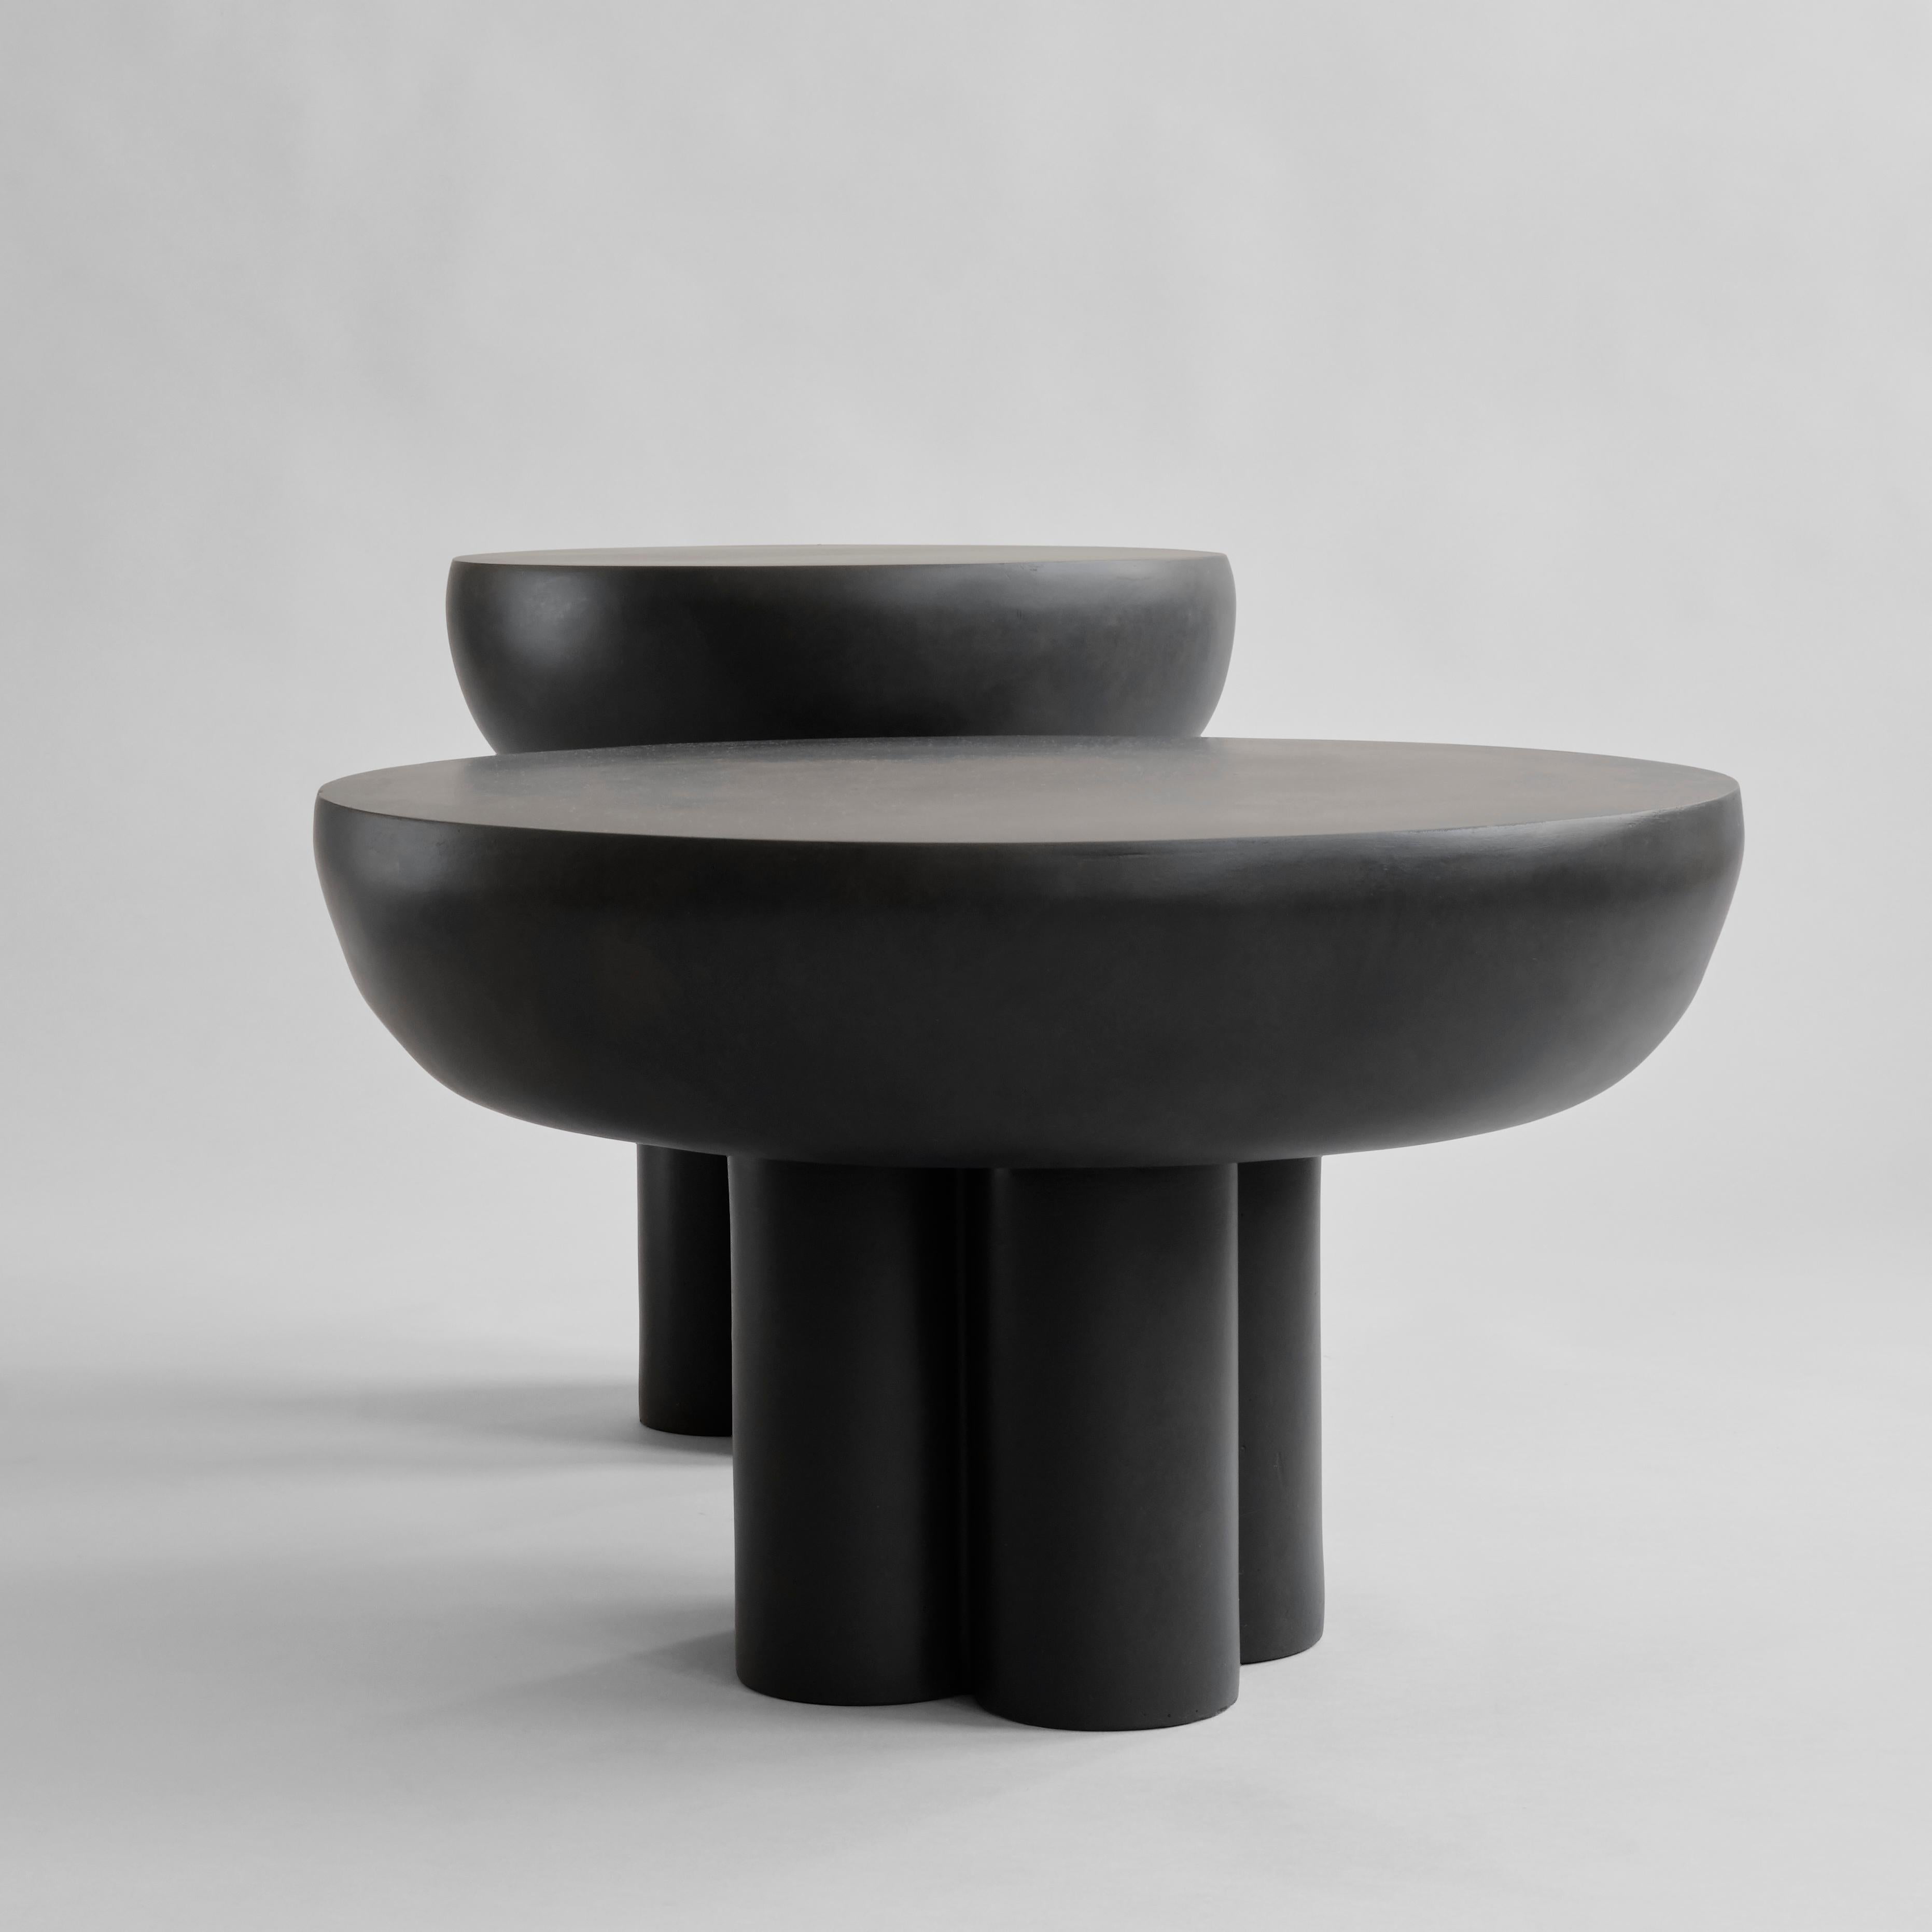 Coffee crown table low by 101 Copenhagen
Designed by Kristian Sofus Hansen & Tommy Hyldahl
Dimensions: L 65 / W 65 /H 41 cm.
Materials: fiber concrete

The collection of tables entitled Crown is cast in one piece formed as a circular tabletop